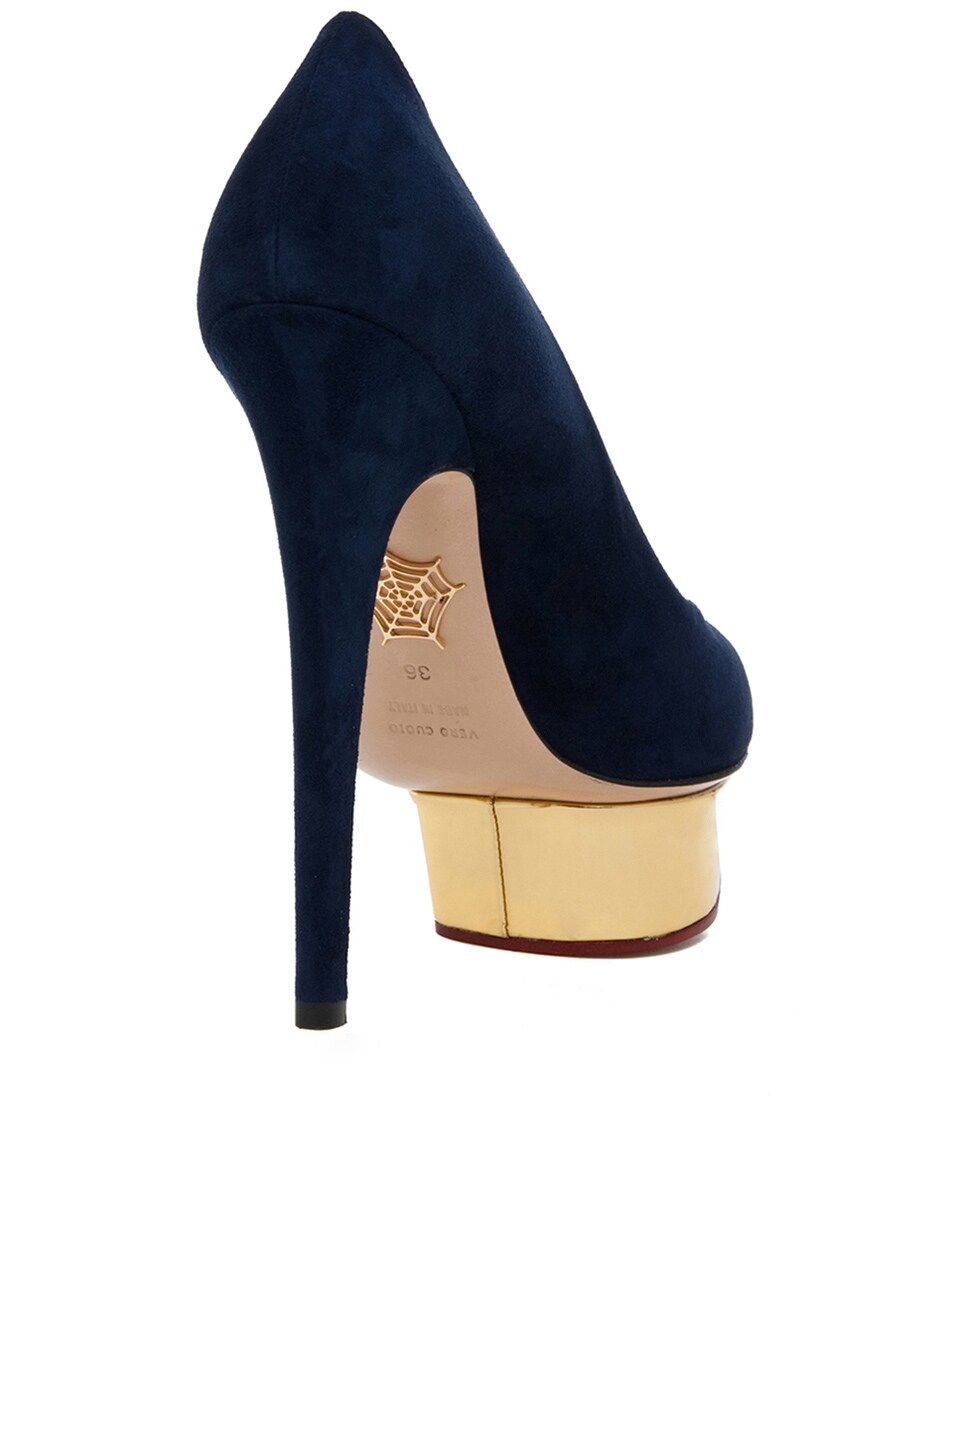 CHARLOTTE OLYMPIA Dolly Signature Court Island Suede Pumps in Navy